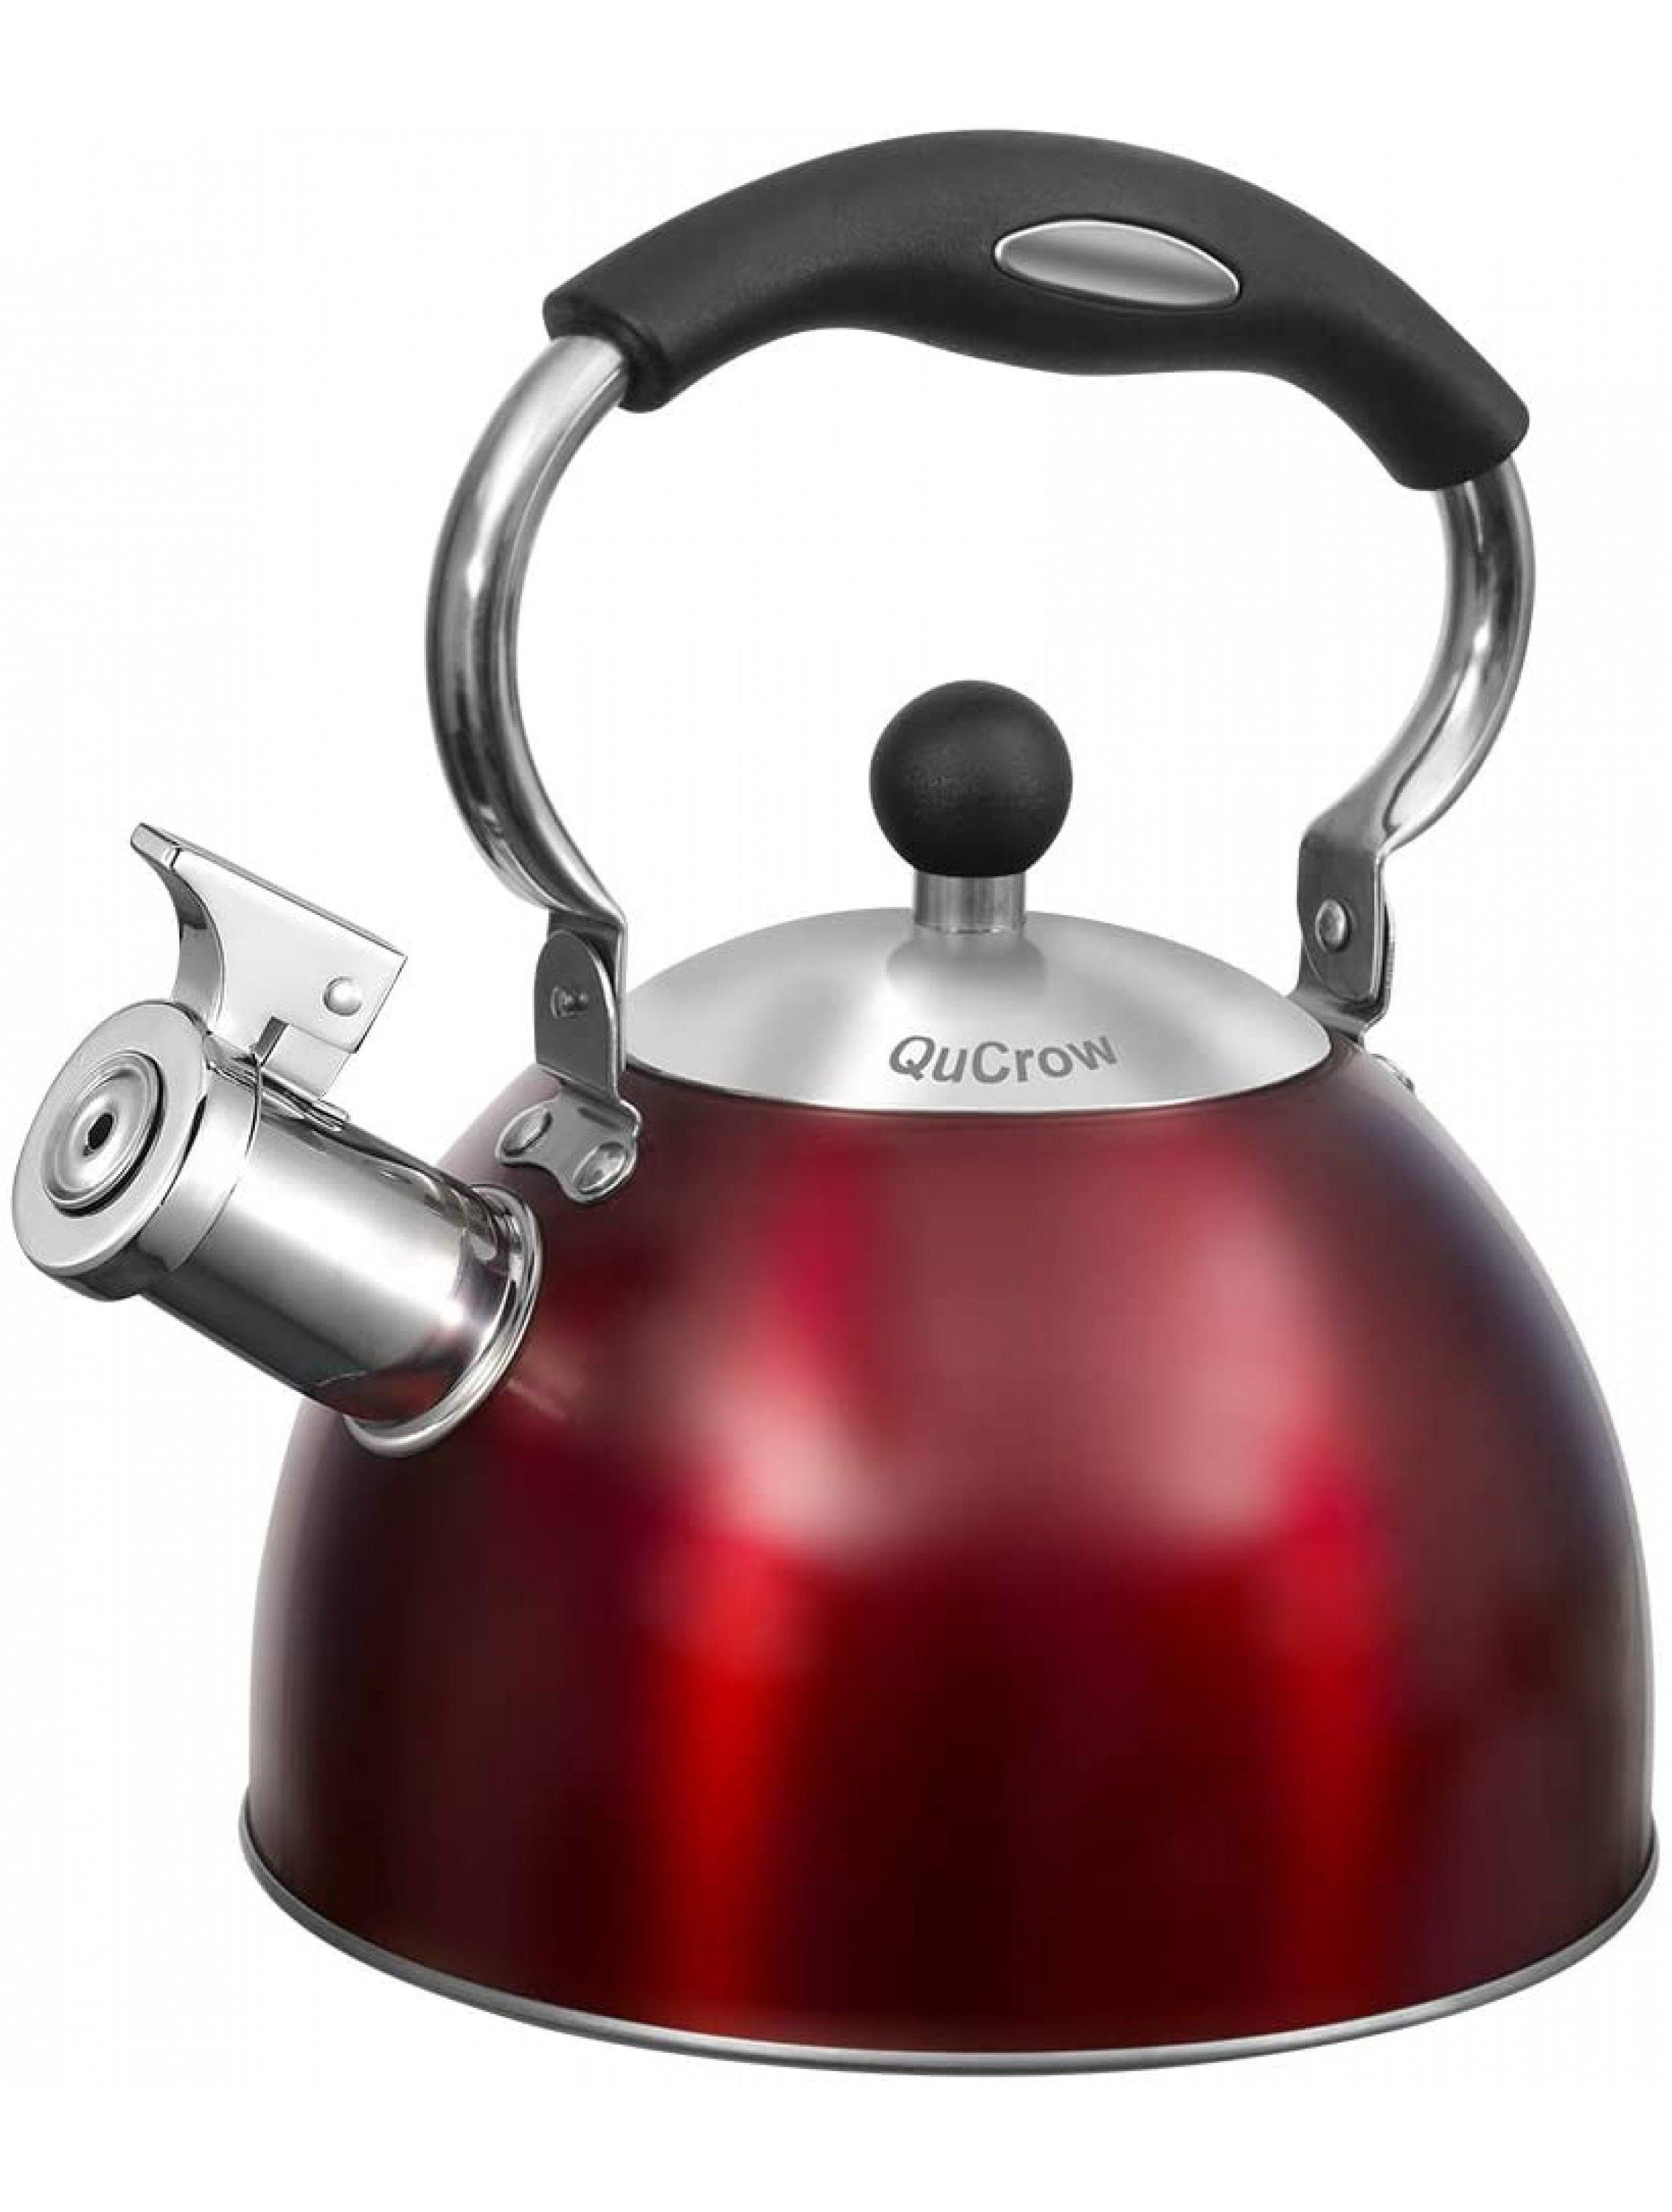 QuCrow Whistling Tea Kettle with Heat-Proof Handle Kitchen Grade Stainless Steel Teapot Stovetops 2.75 Quart Red - BXVUF1SGN